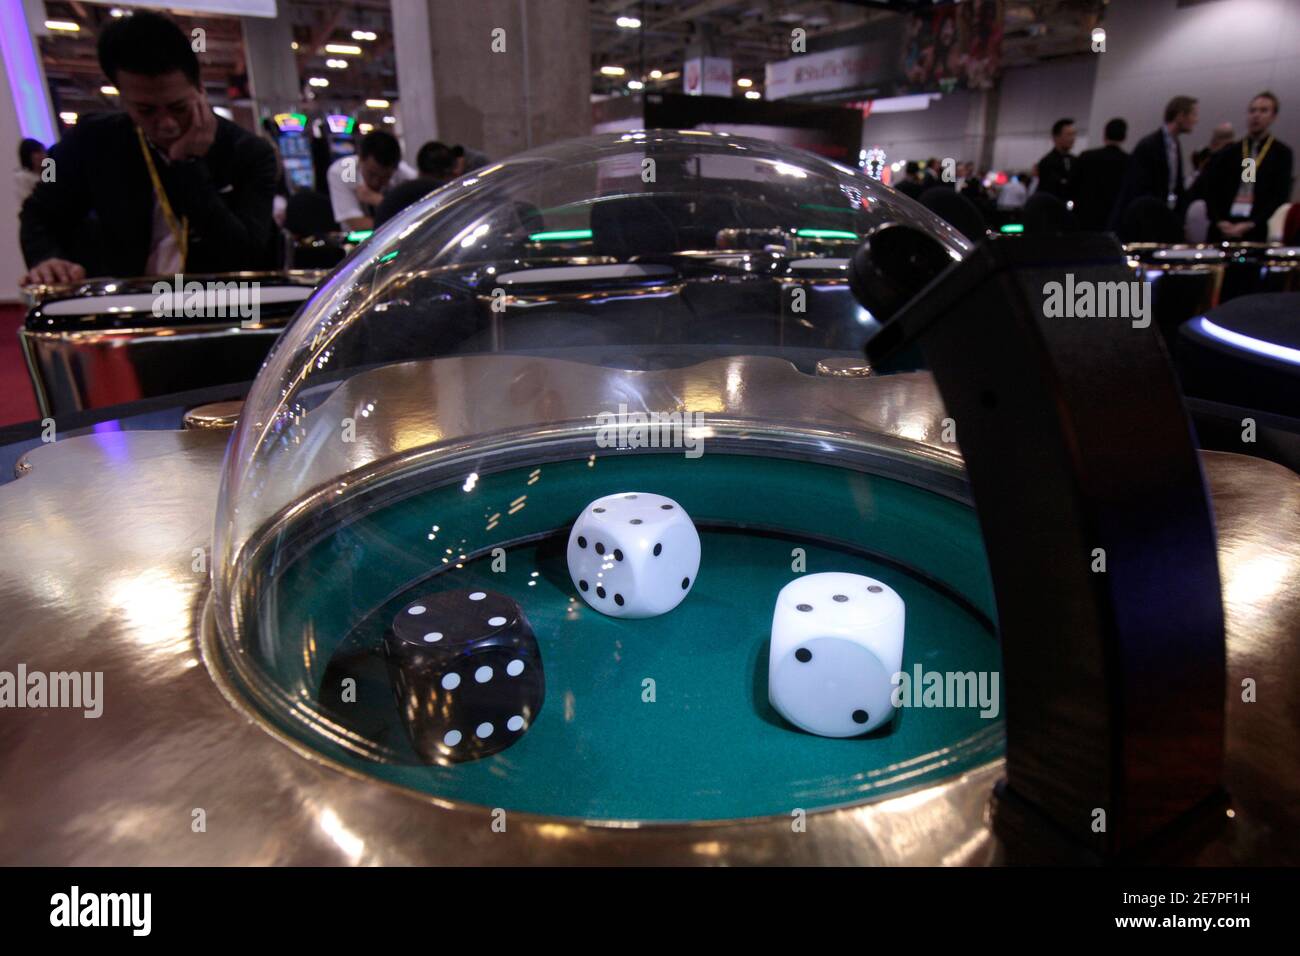 A Man plays dice during the Global Gaming Expo Asia in Macau June 9, 2010. The 4th annual Global Gaming Expo will feature more than 120 international suppliers from more than 20 countries displaying innovative casino equipments,table games,slot machines,design,security and surveillance products.  REUTERS/Tyrone Siu (CHINA - Tags: BUSINESS SOCIETY) Stock Photo